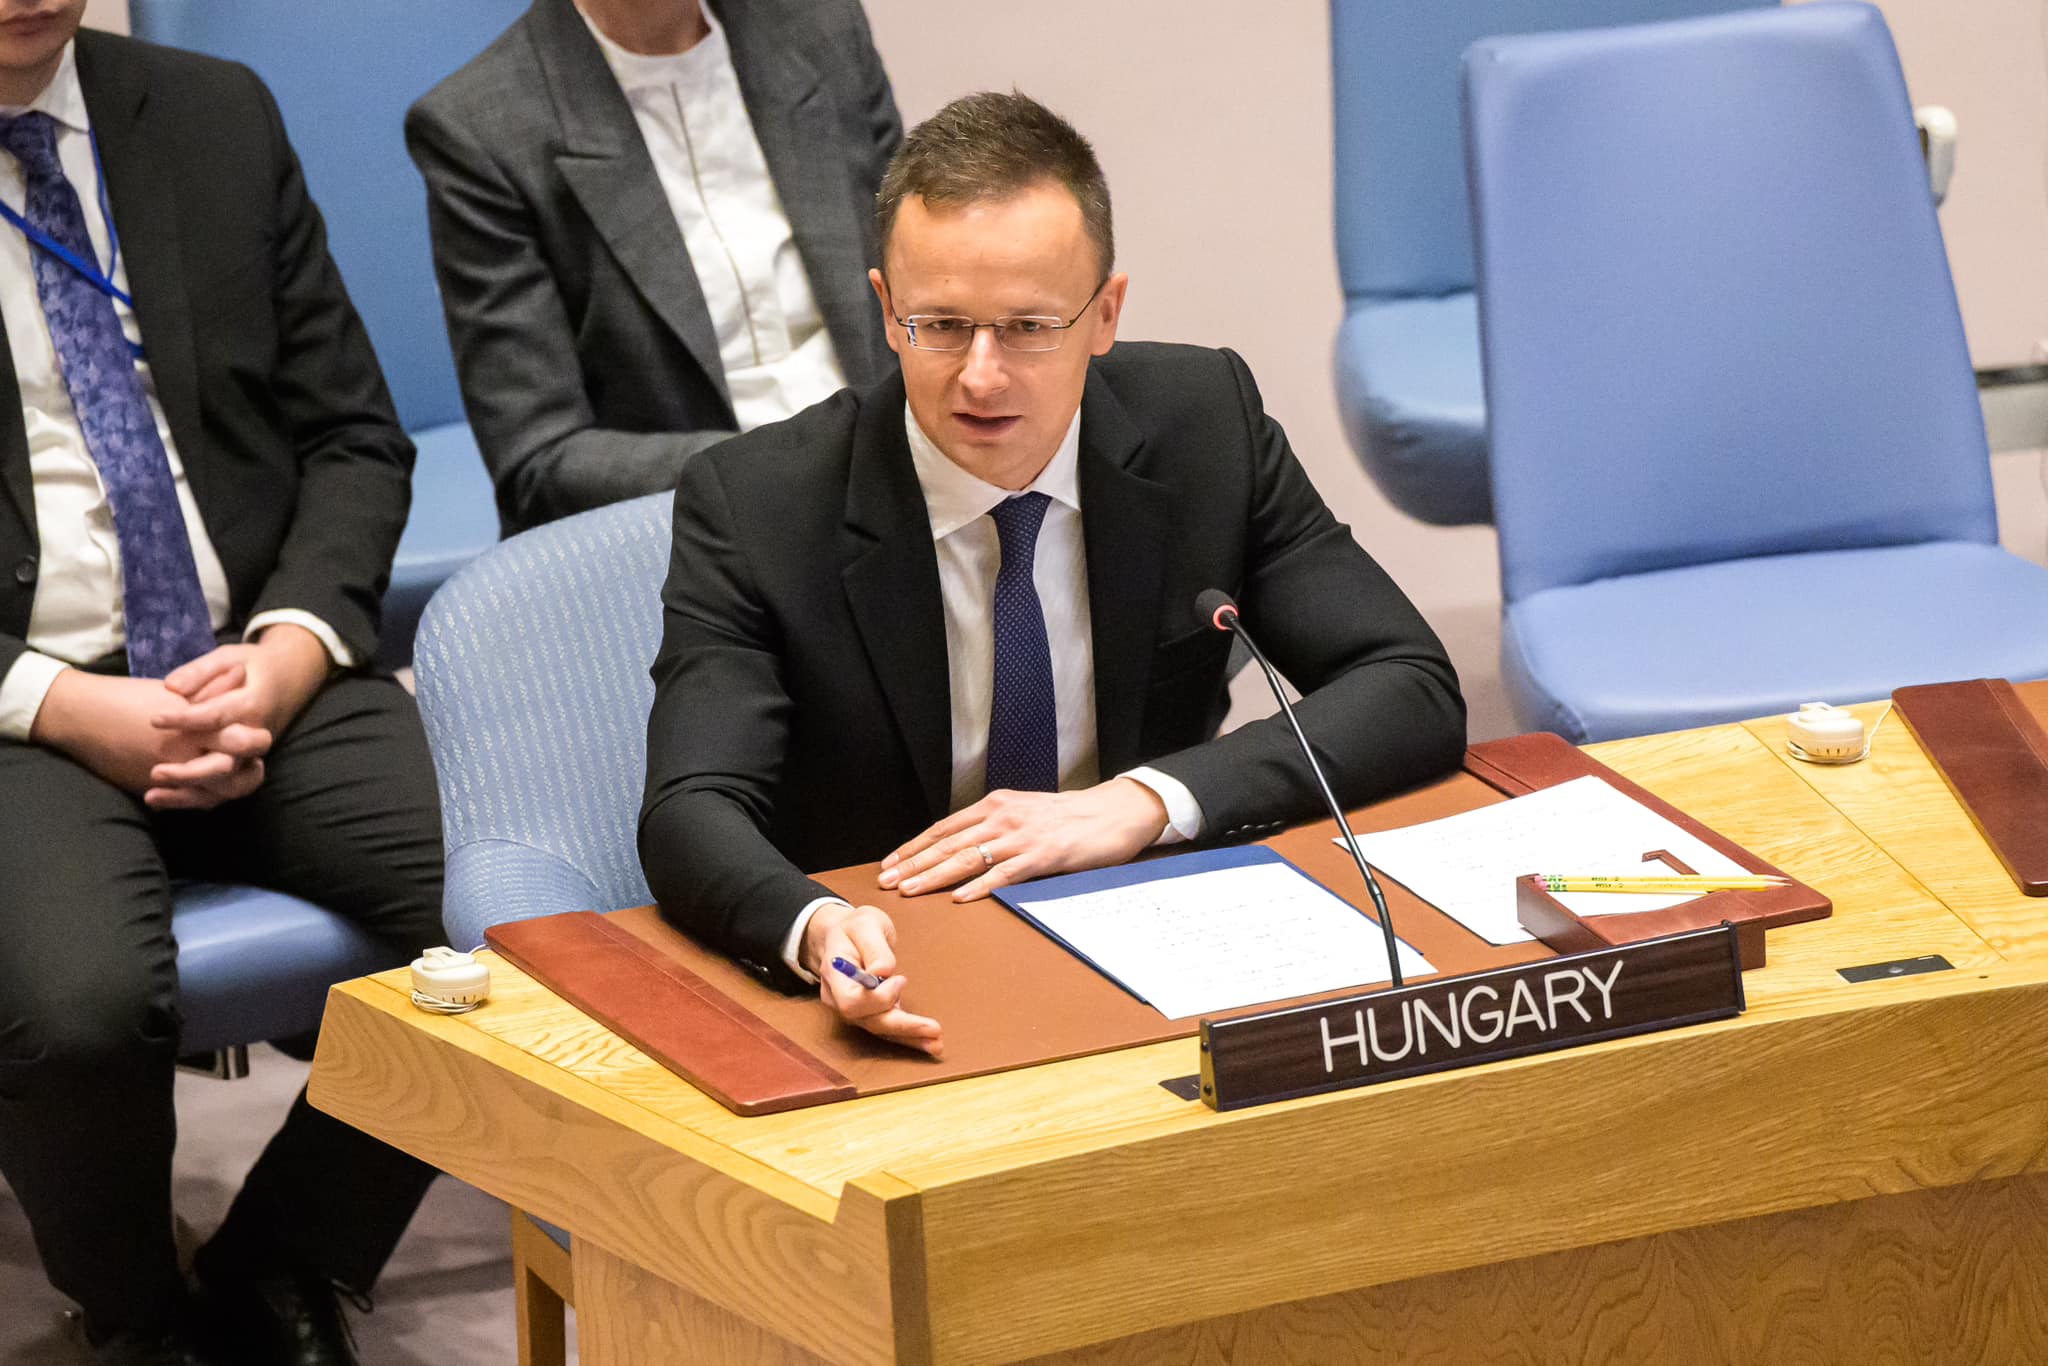 Foreign Minister Believes That Hungarians Have Already Paid a High Price for the War